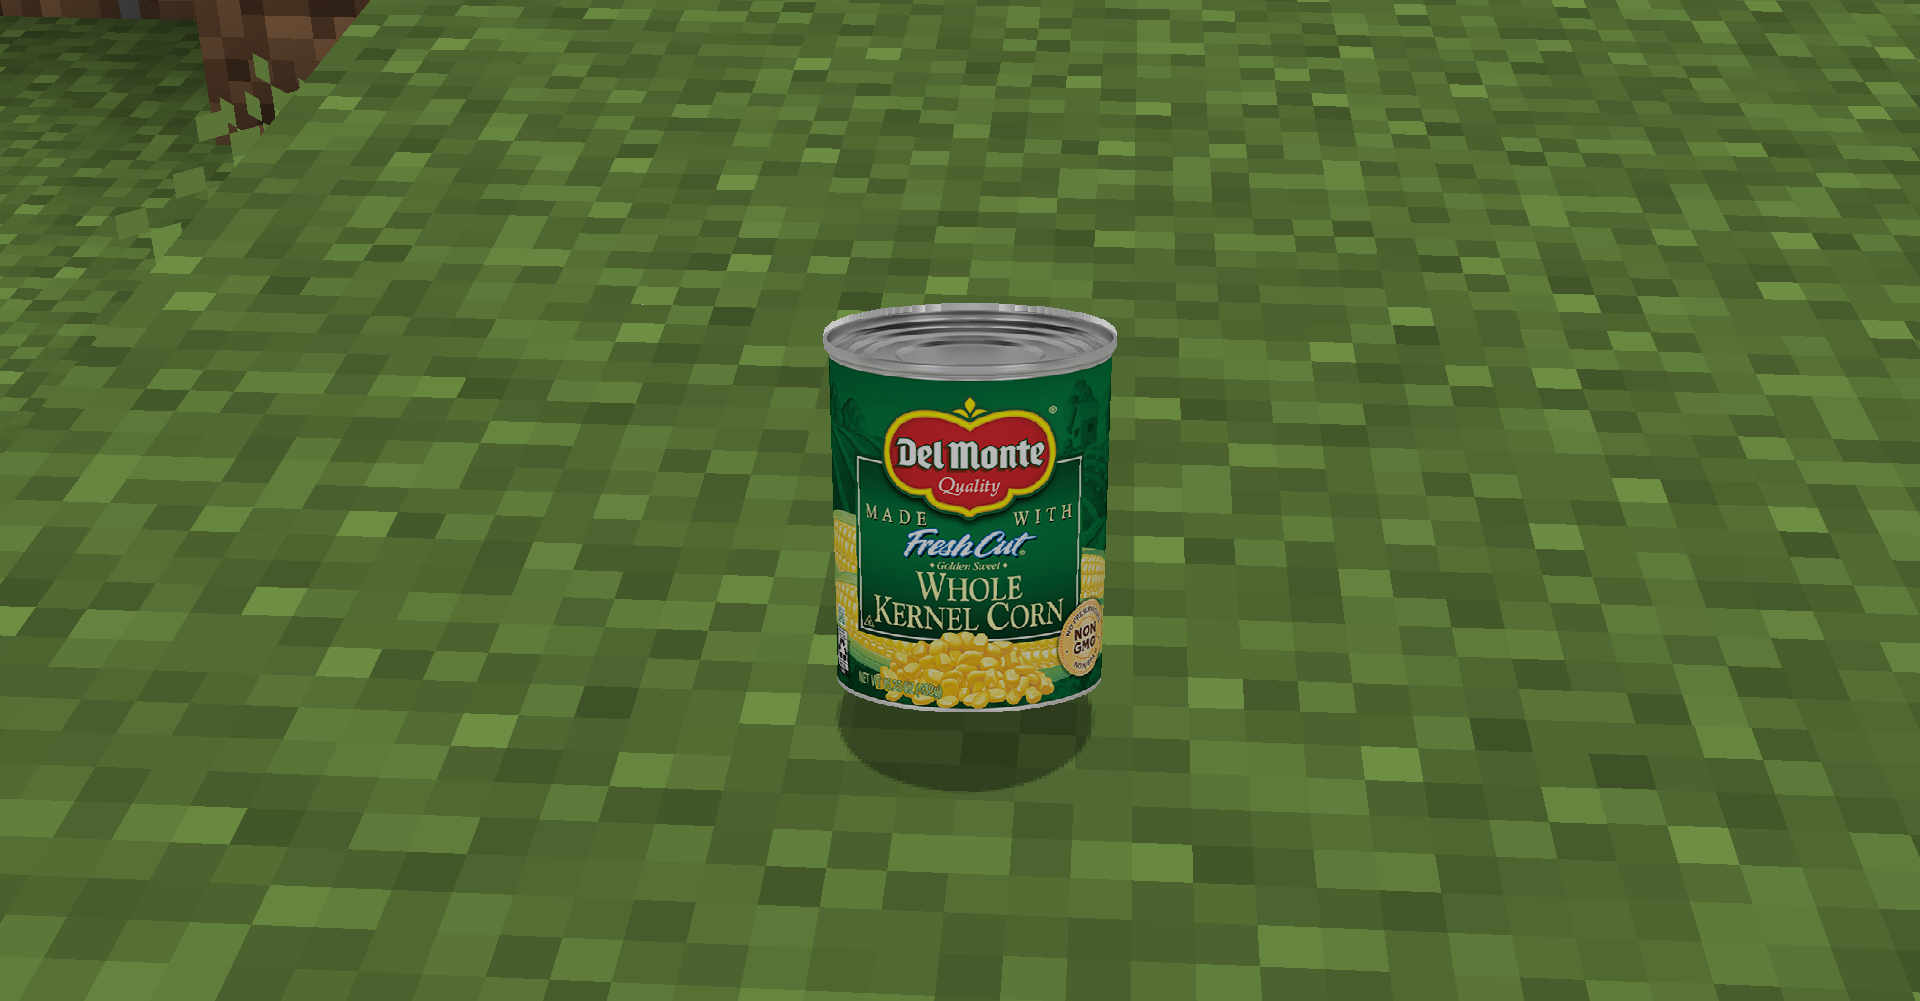 The Can of Corn on the ground